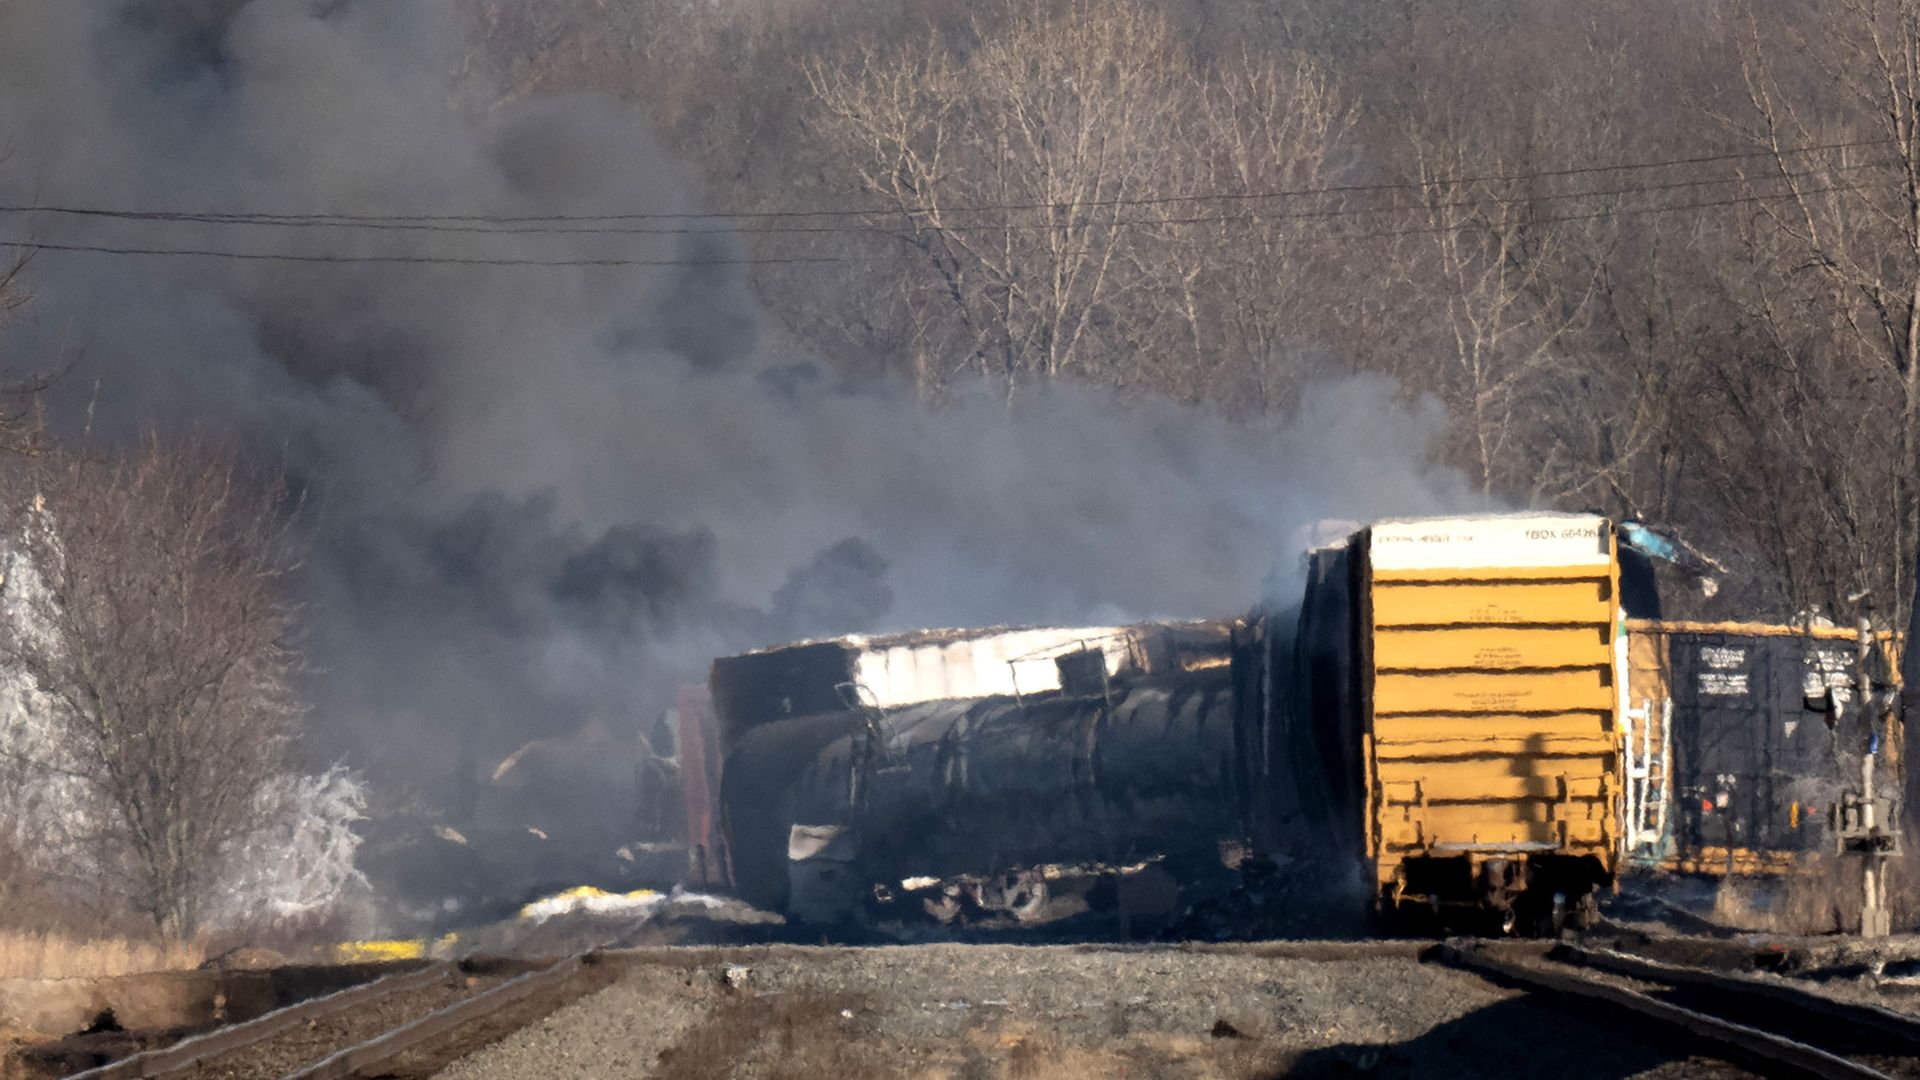 A train carrying hazardous materials is on fire near East Palestine, Ohio.